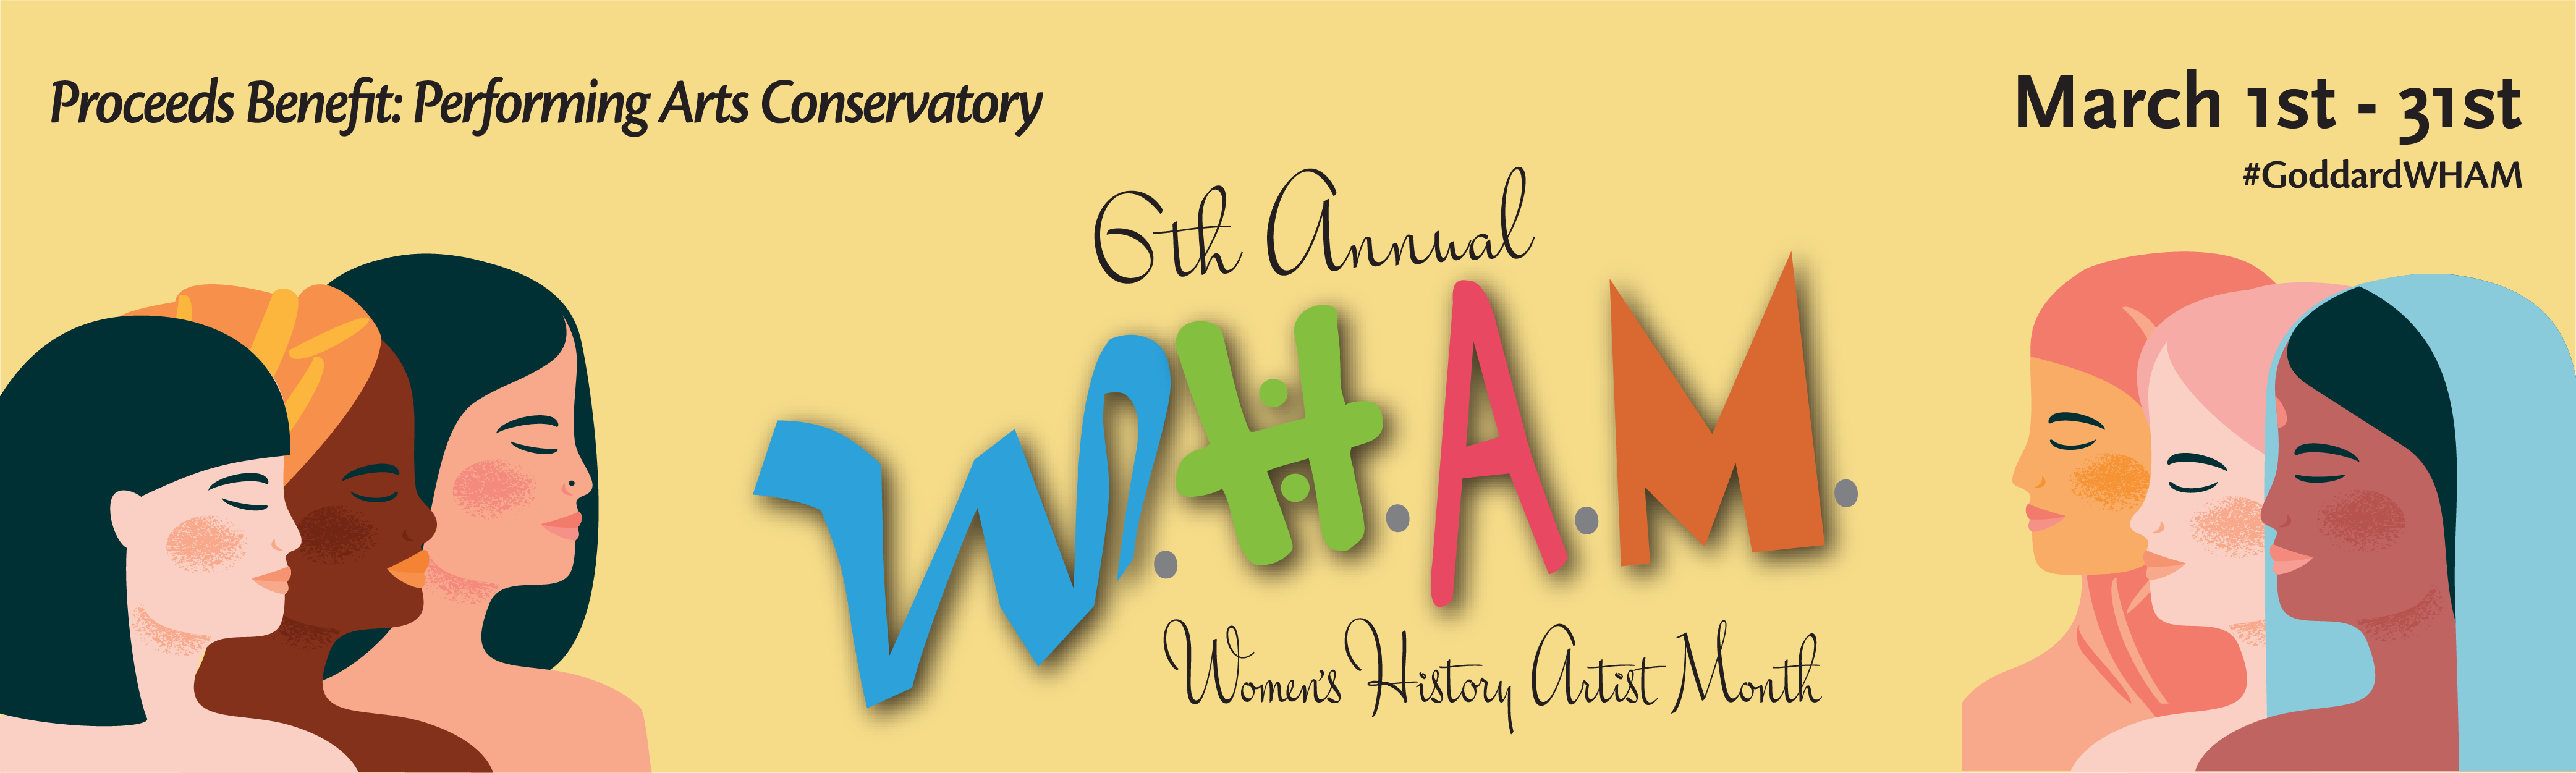 Banner reading 6th Annual WHAM Women's History Artist Month March 1-31 goddard.org/WHAM. Proceeds Benefit Performing Arts Conservatory